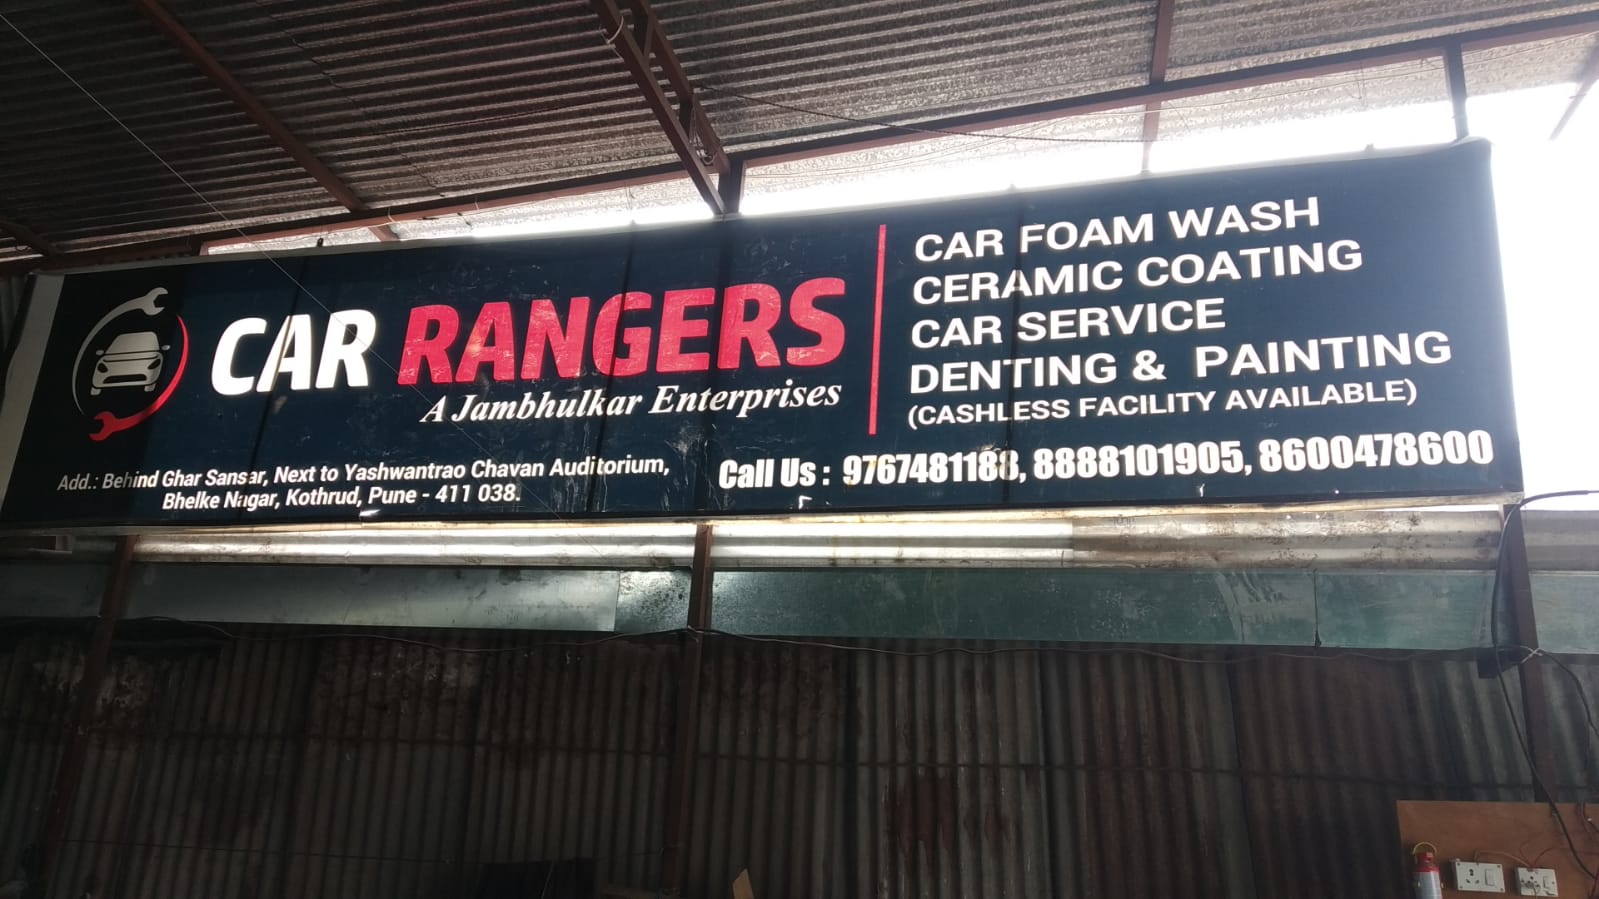 Book Car Wash With Car Rangers Center in Pune at Affordable Price.